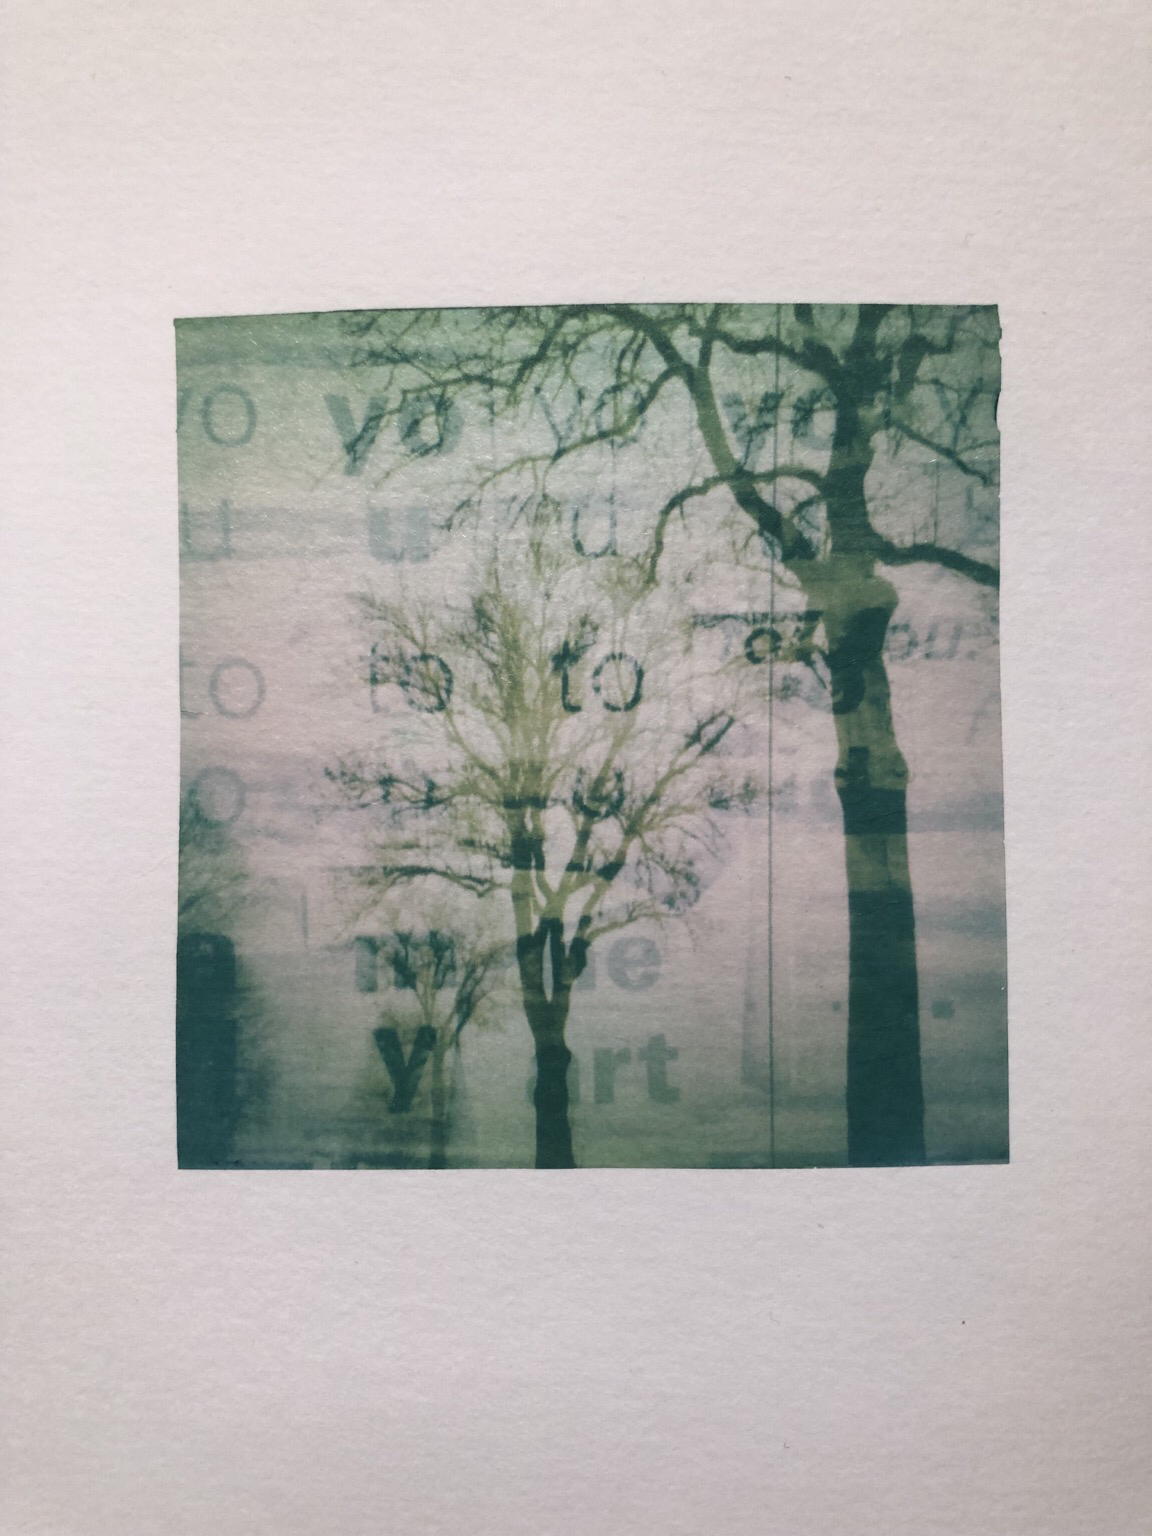 Double exposure photo : a perspective of three trees silhouettes without foliage and a background of white paper with printed letters and syllabs. Polaroid emulsion lift.